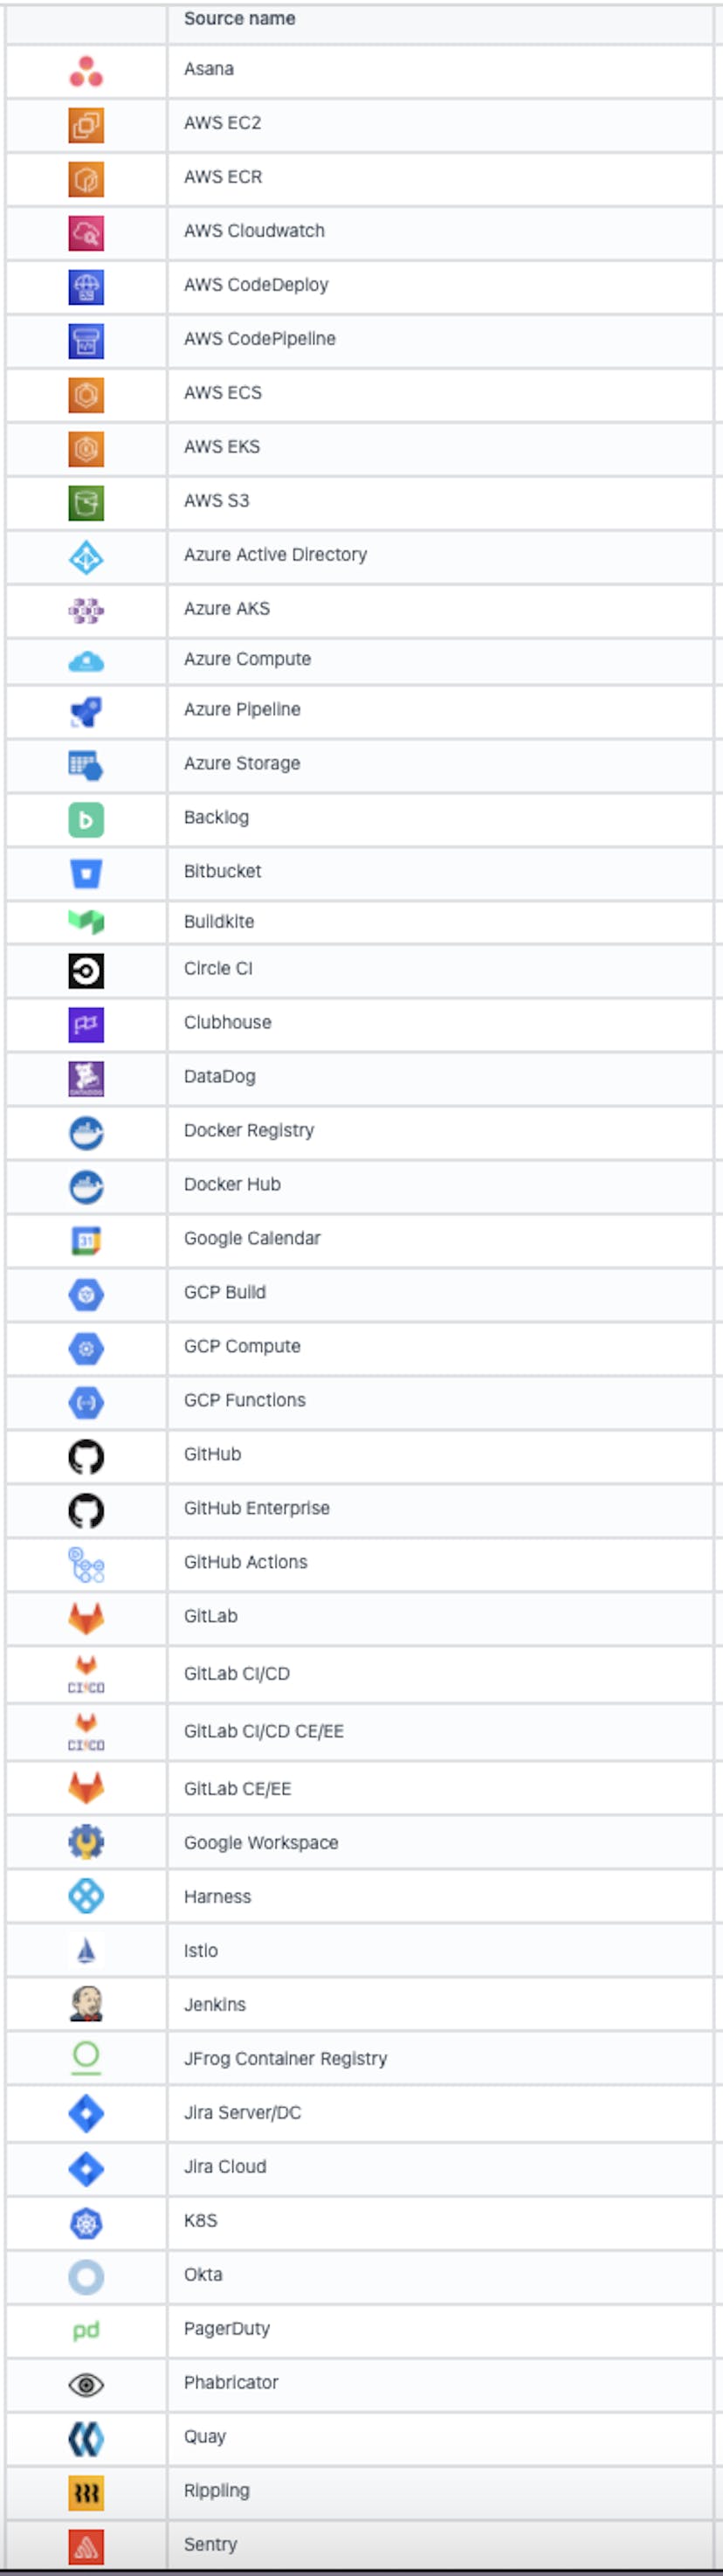 Catalog of sources where engineers contribute. Credits: faros.ai